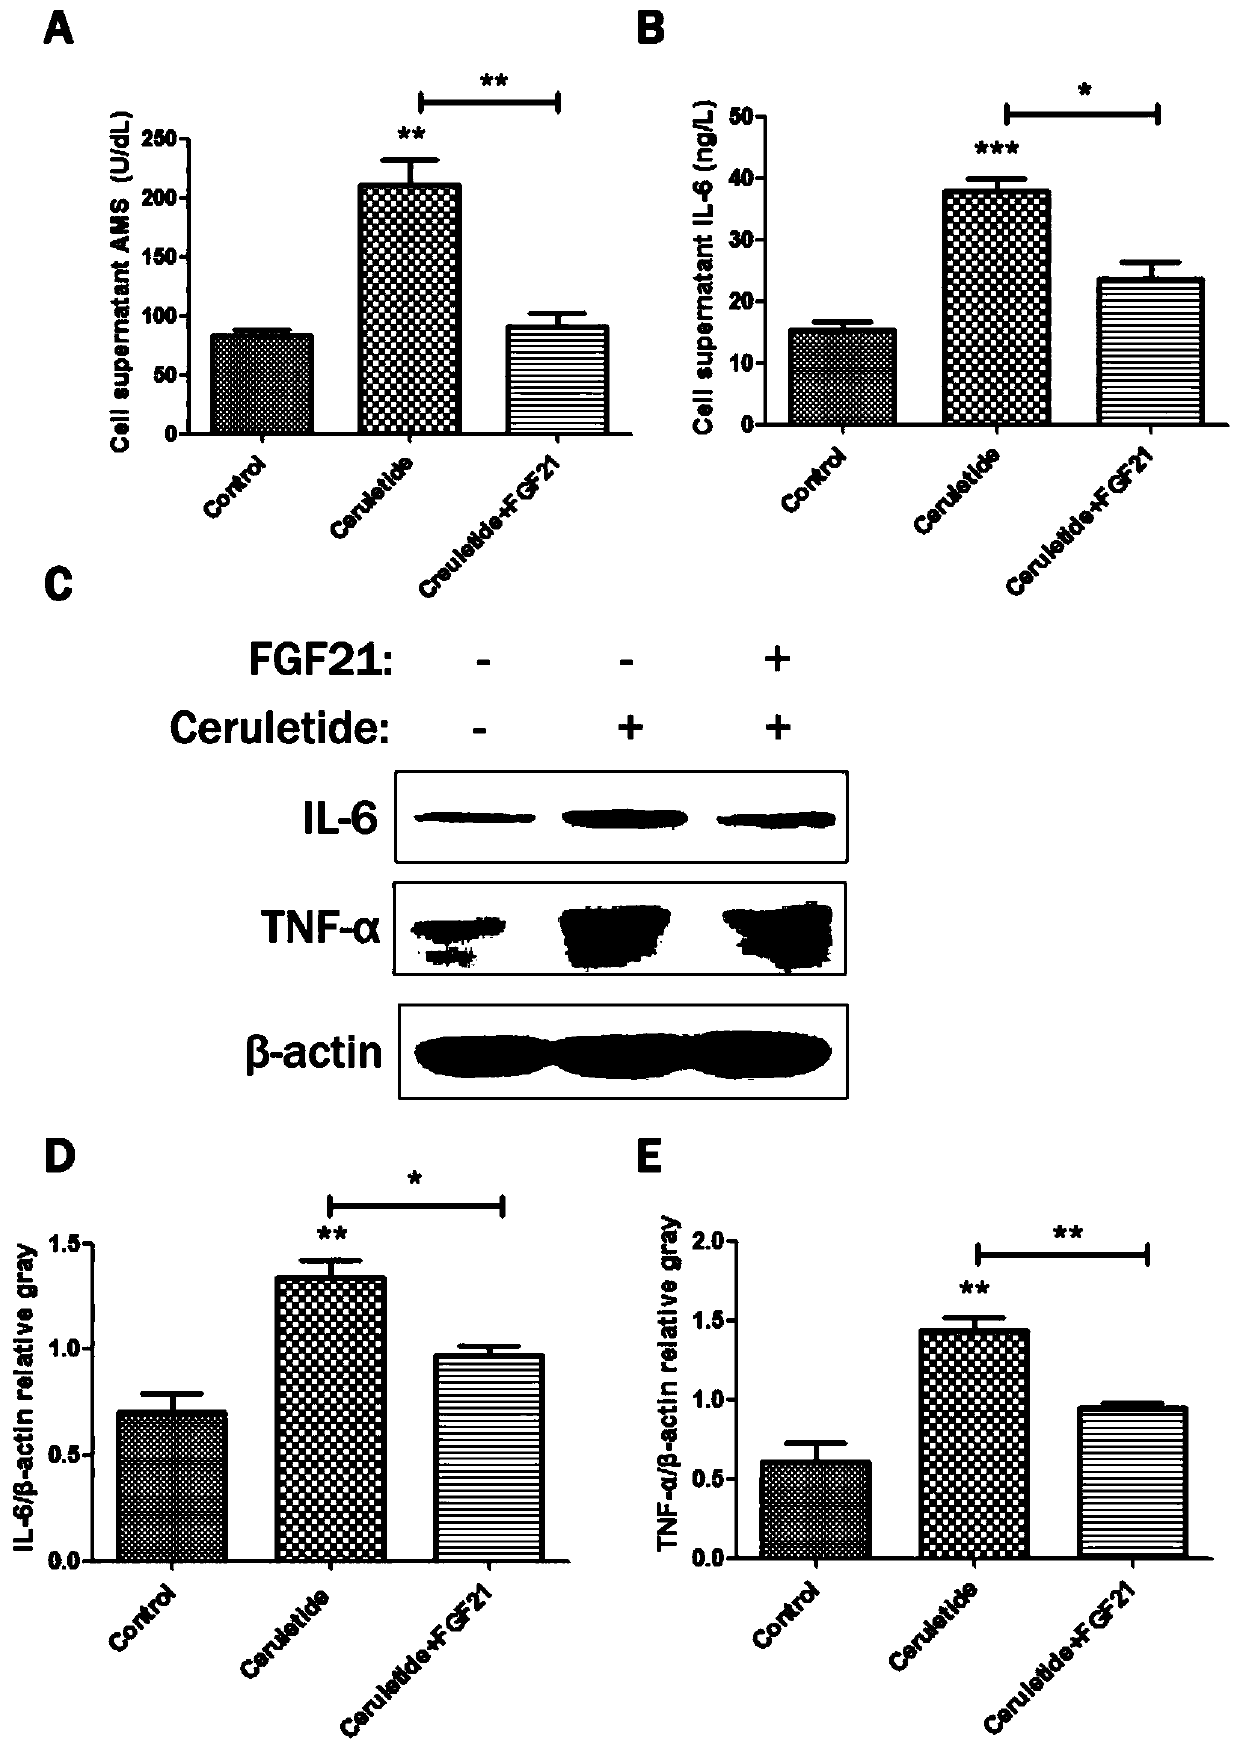 Application of fibroblast growth factor 21 (FGF 21) in preparation of drugs for treating acute pancreatitis